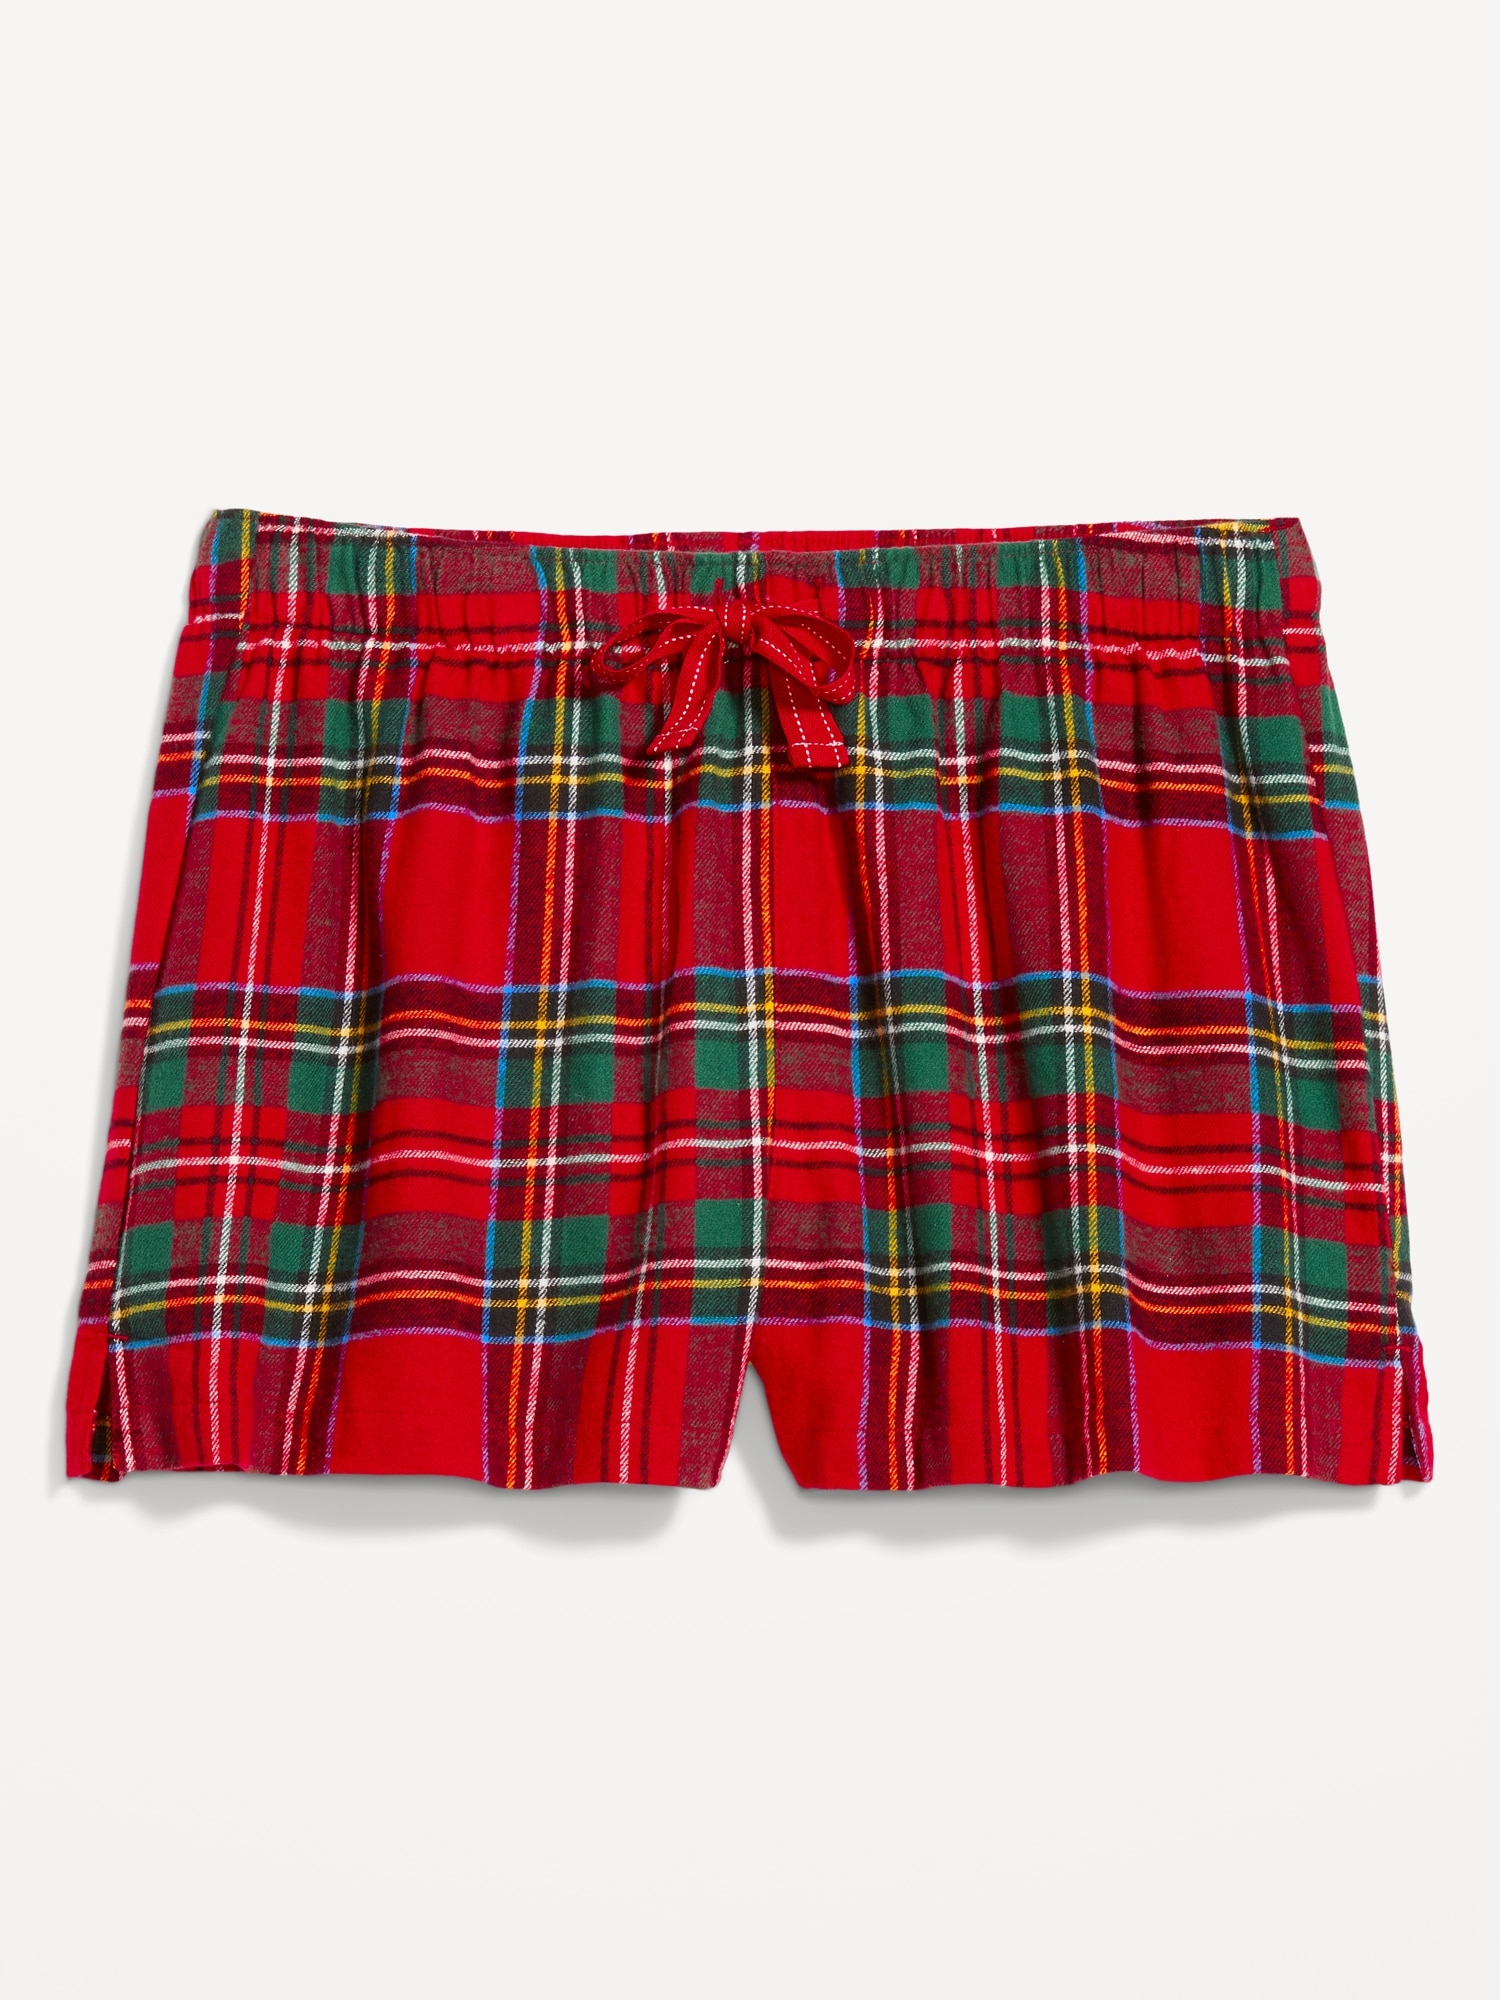 Matching Flannel Pajama Shorts for Women -- 2.5-inch inseam | Old Navy